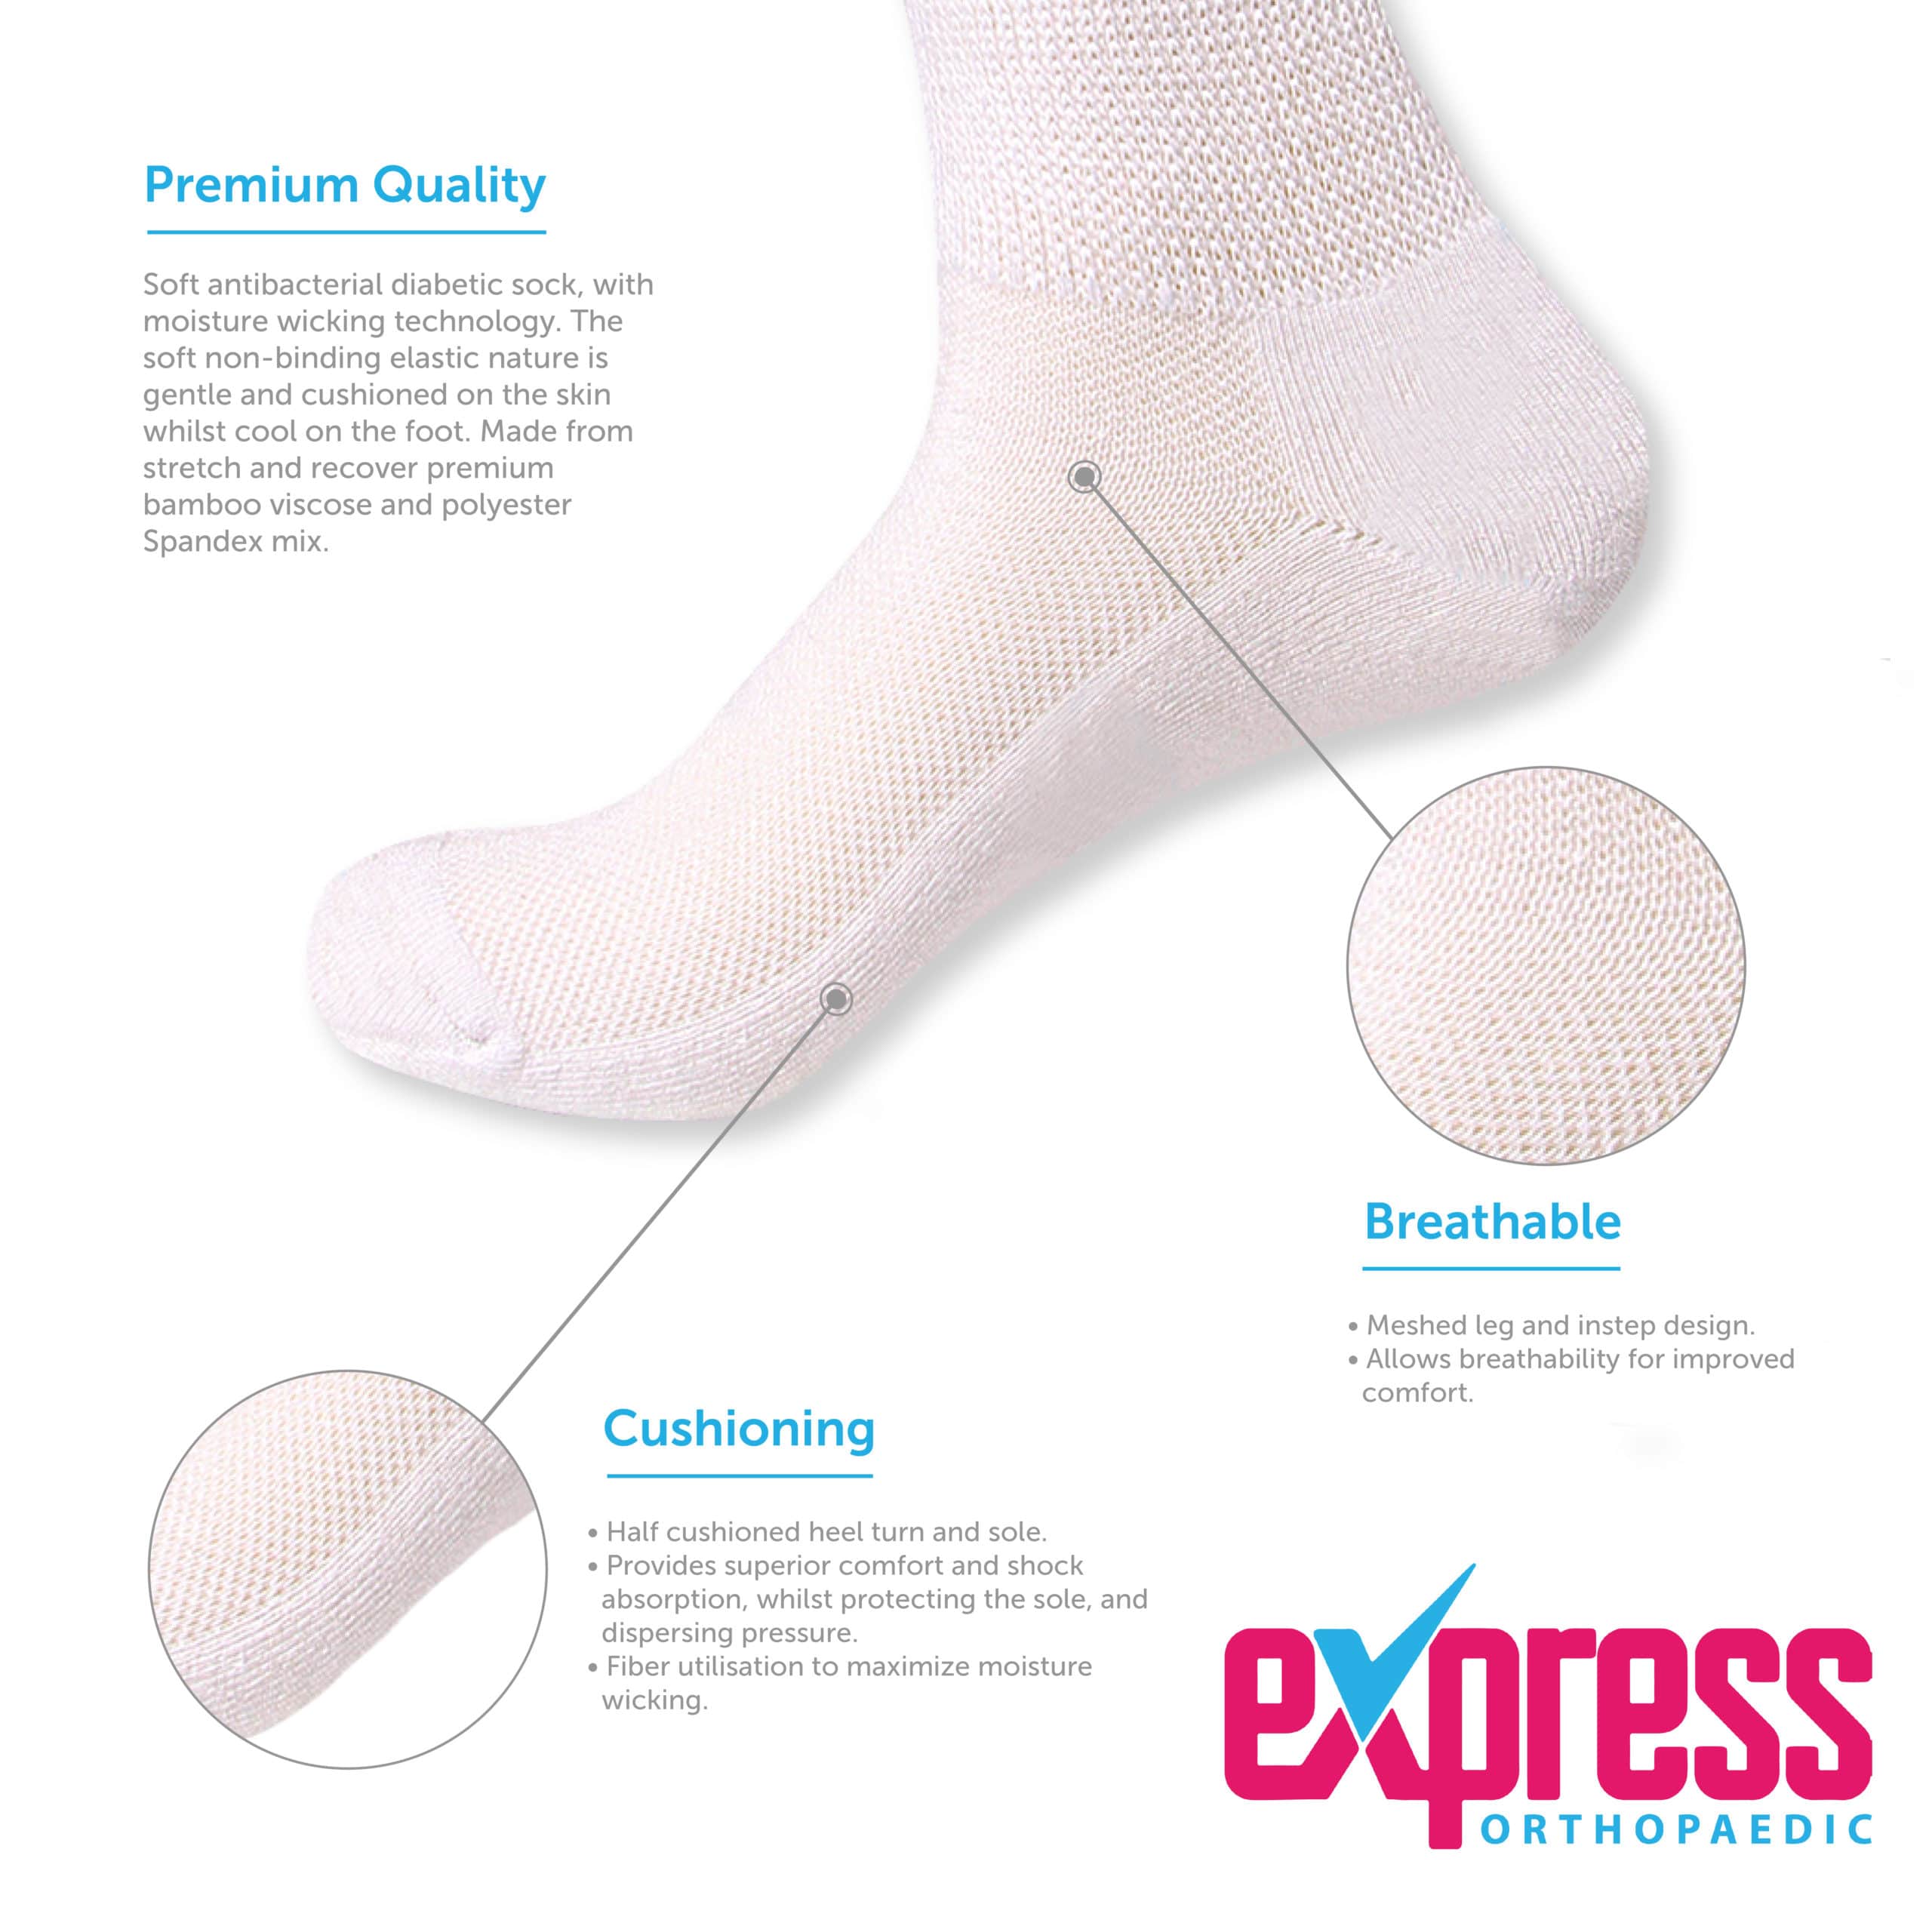 Seamless Diabetic Socks With Bamboo (Pair) - Orthotix UK - From £6.95